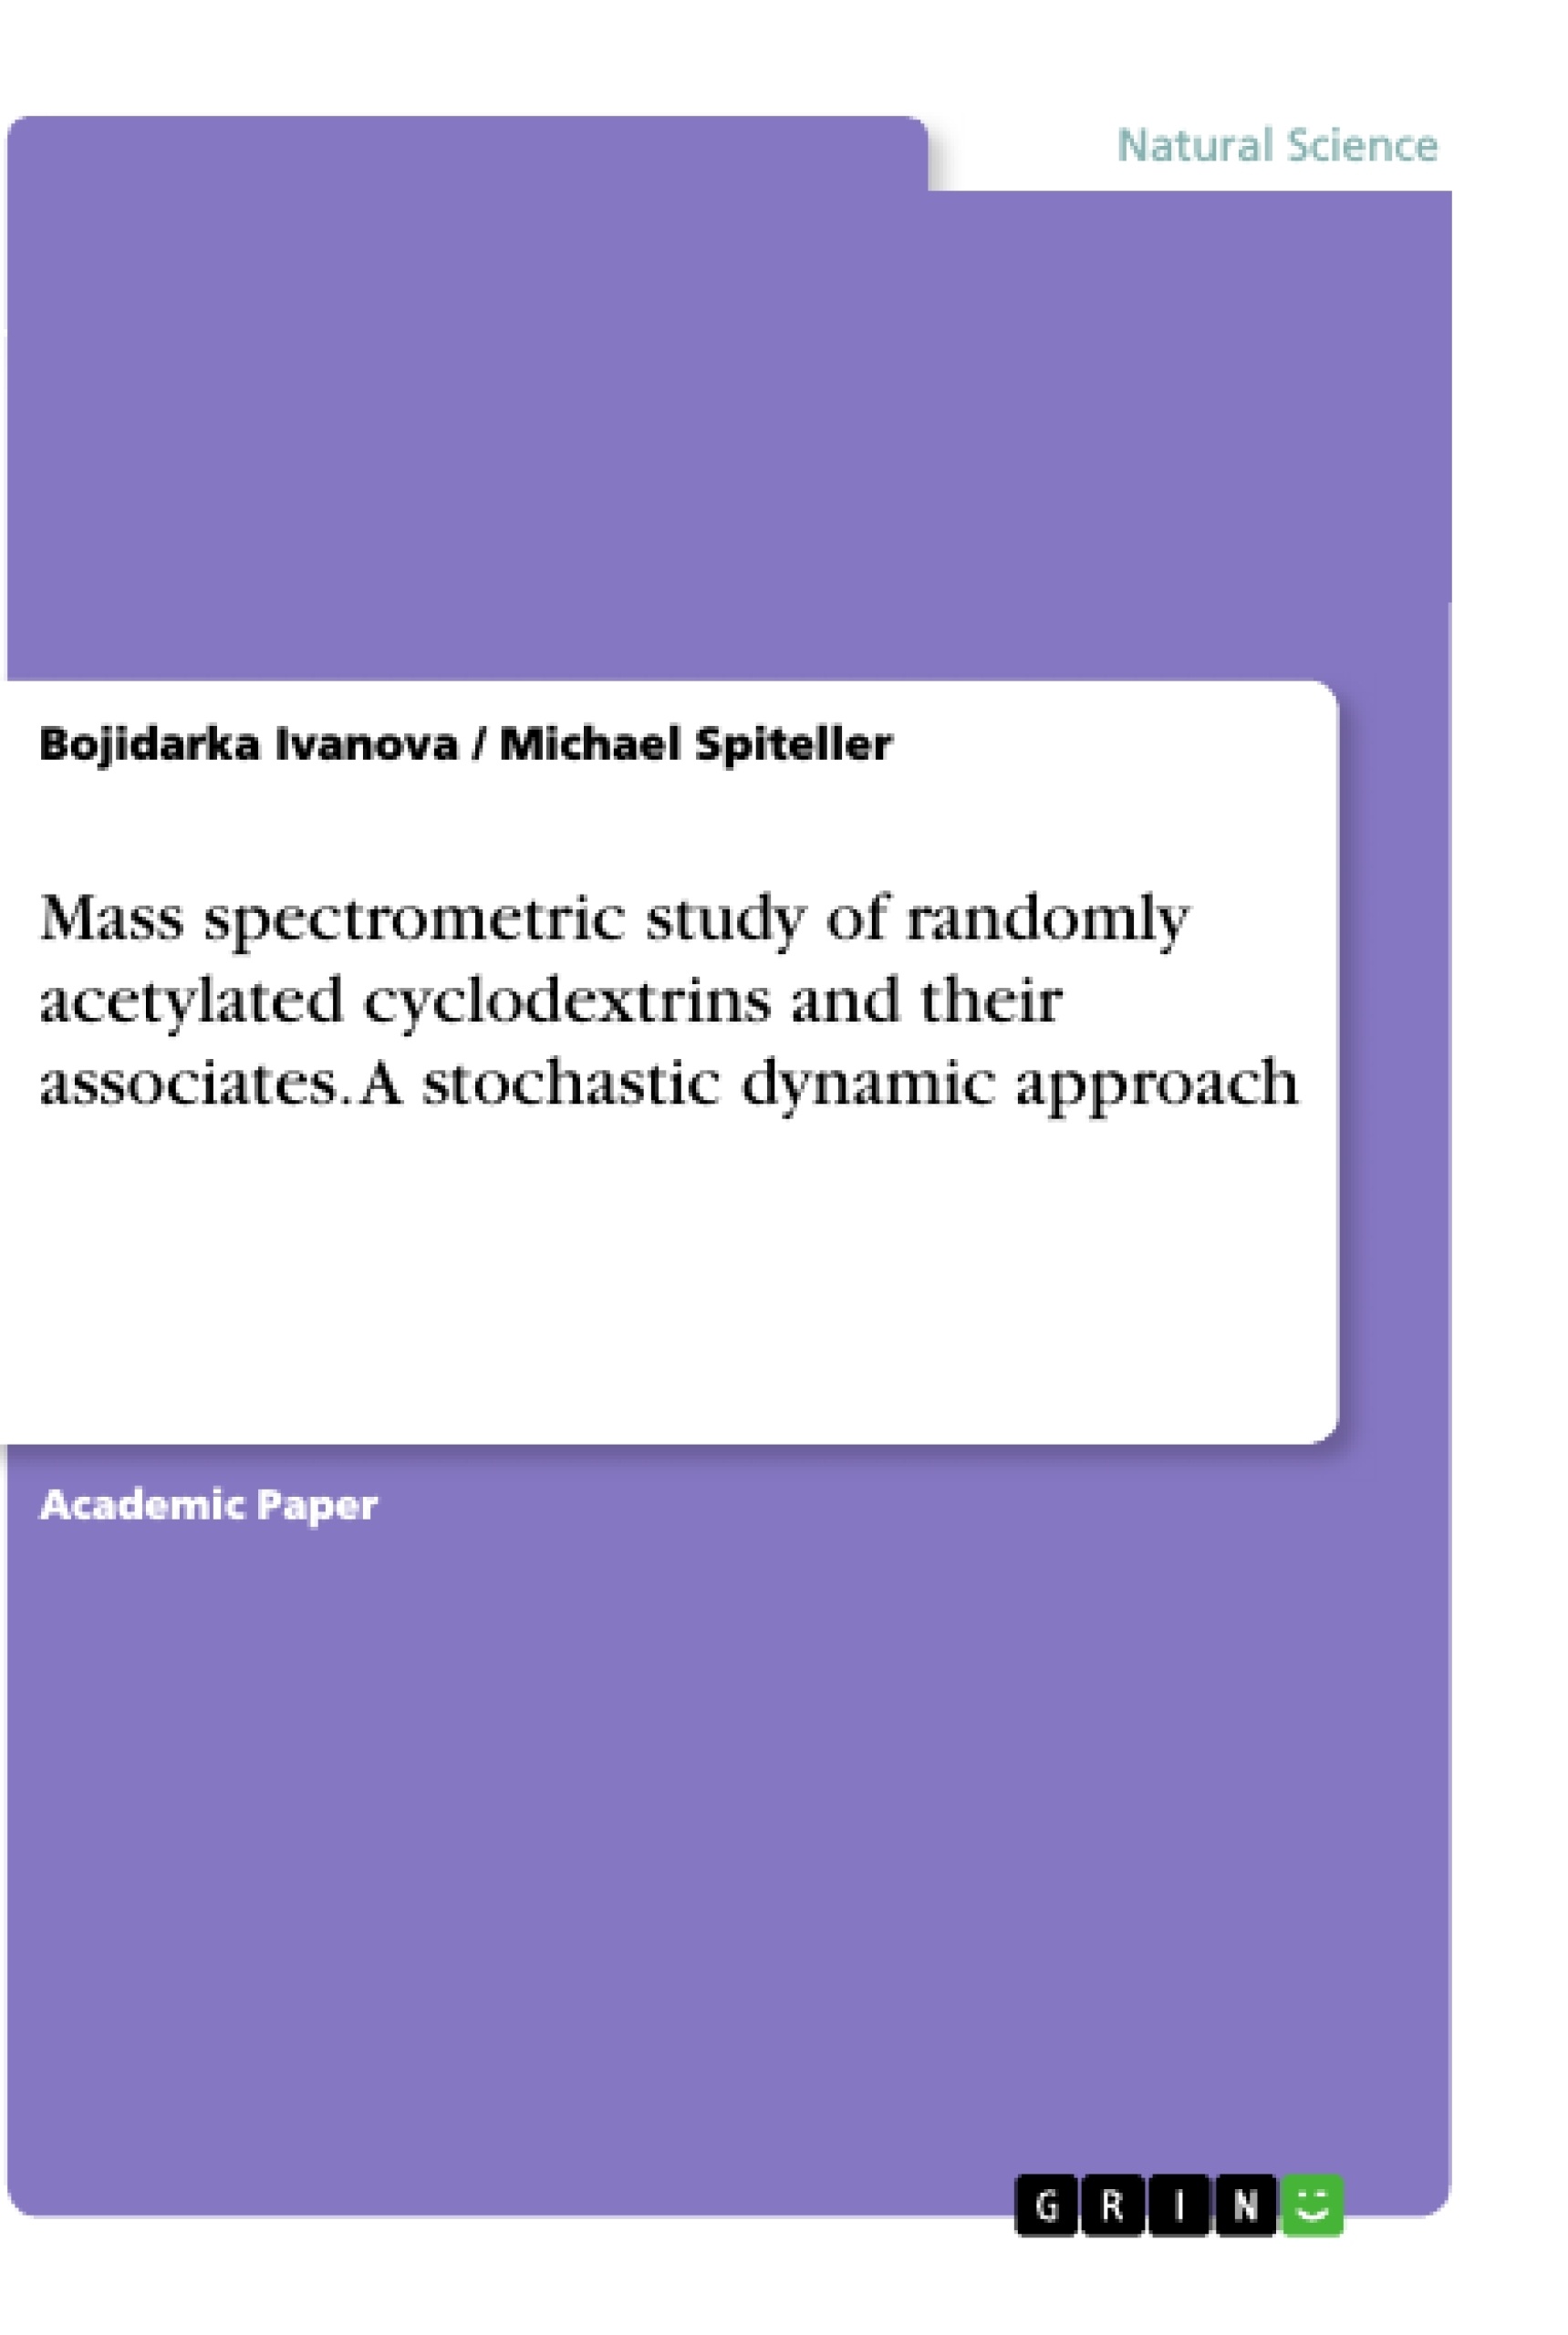 Title: Mass spectrometric study of randomly acetylated cyclodextrins and their associates. A stochastic dynamic approach